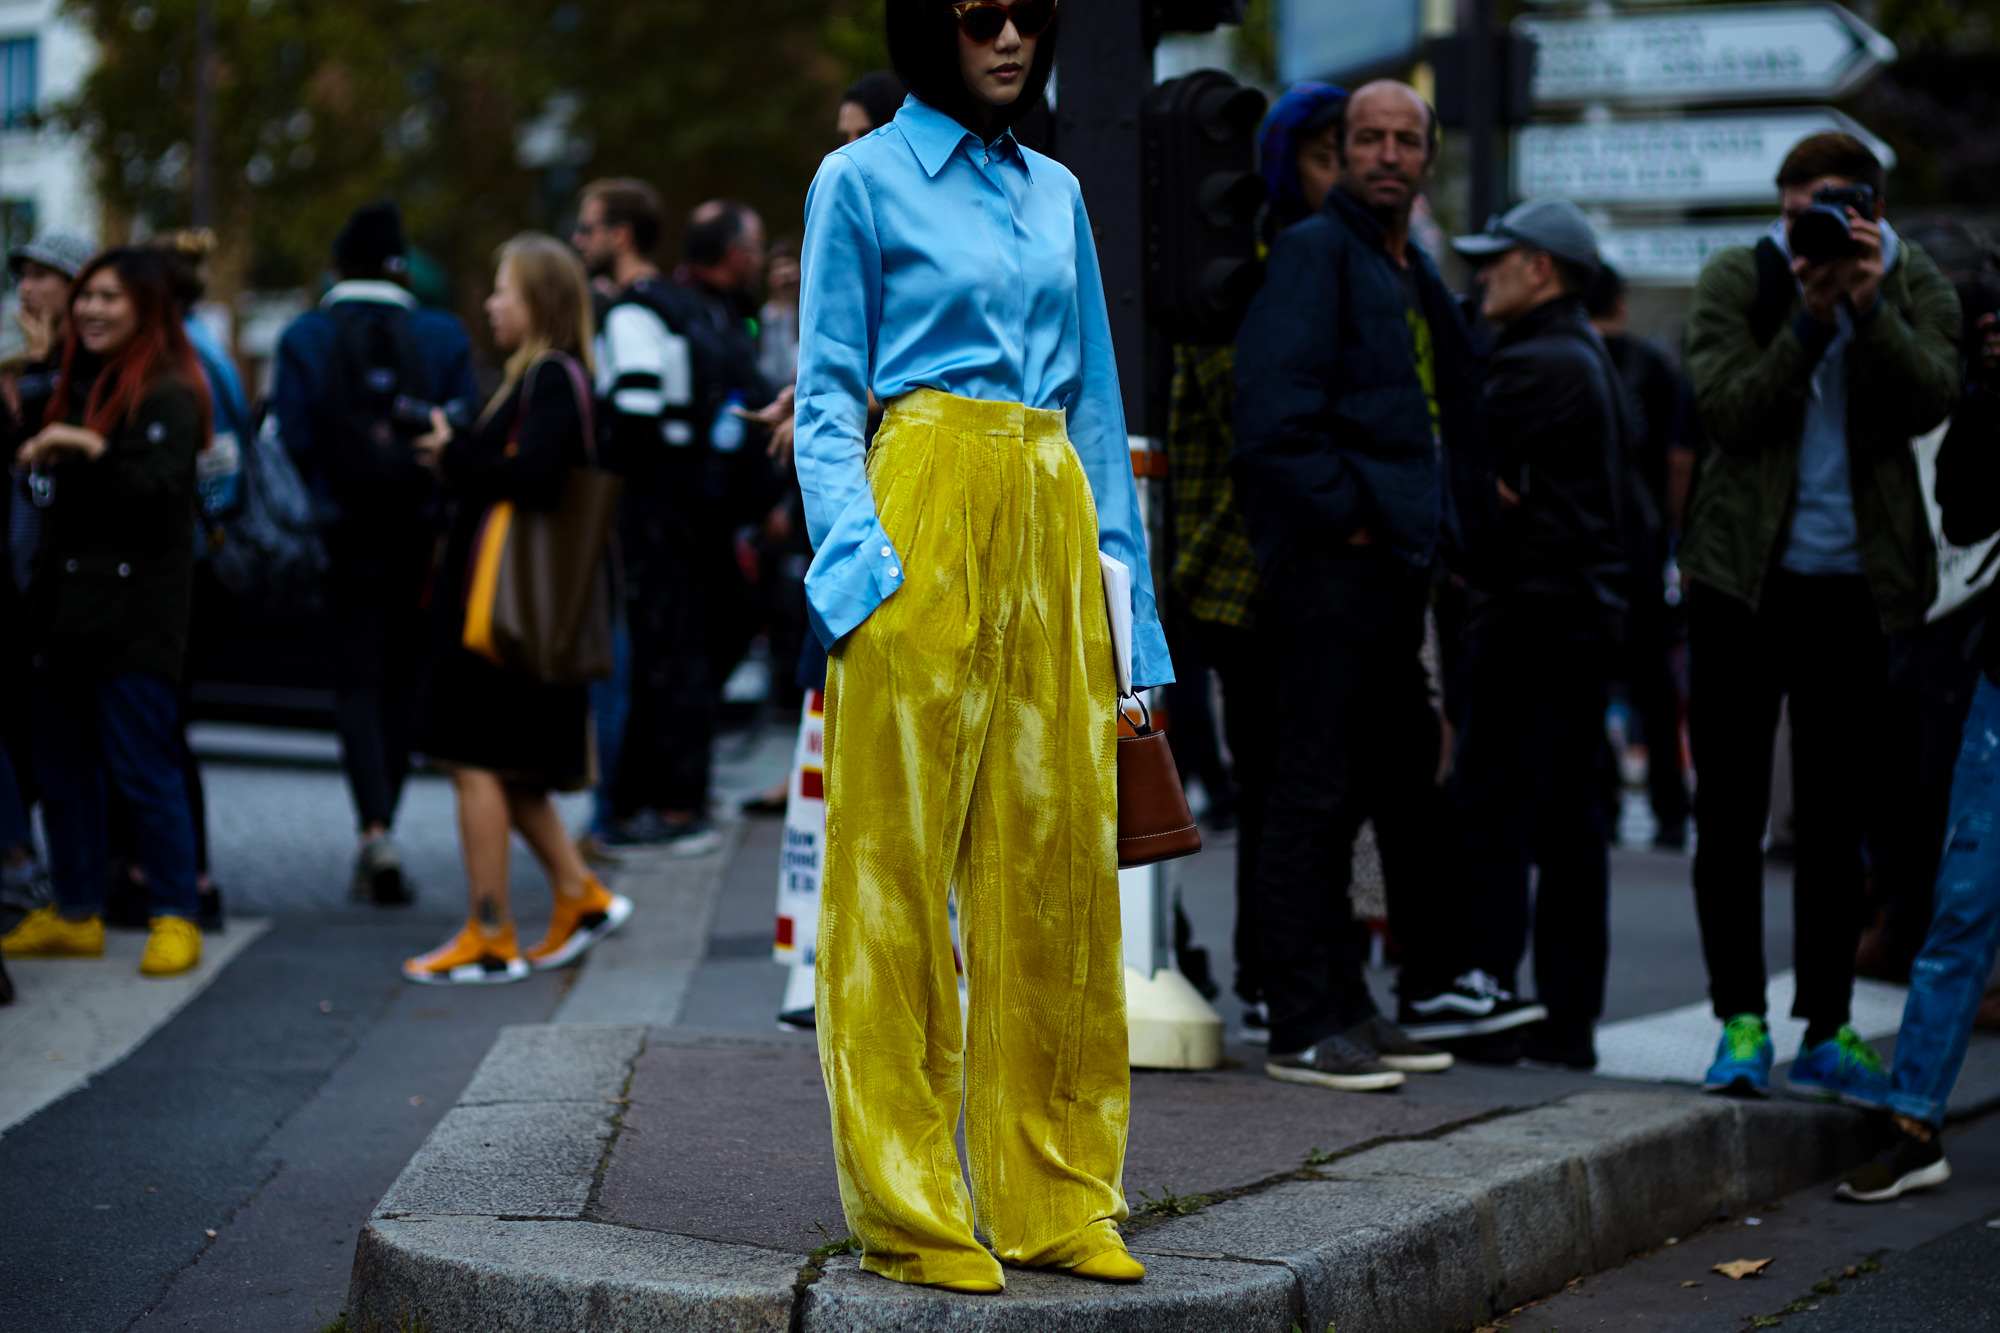 PFW Spring-Summer 2017 Street Style: Yoyo Cao wearing a blue shirt and yellow velvet pants by Celine before the Celine SS17 fashion show in Paris